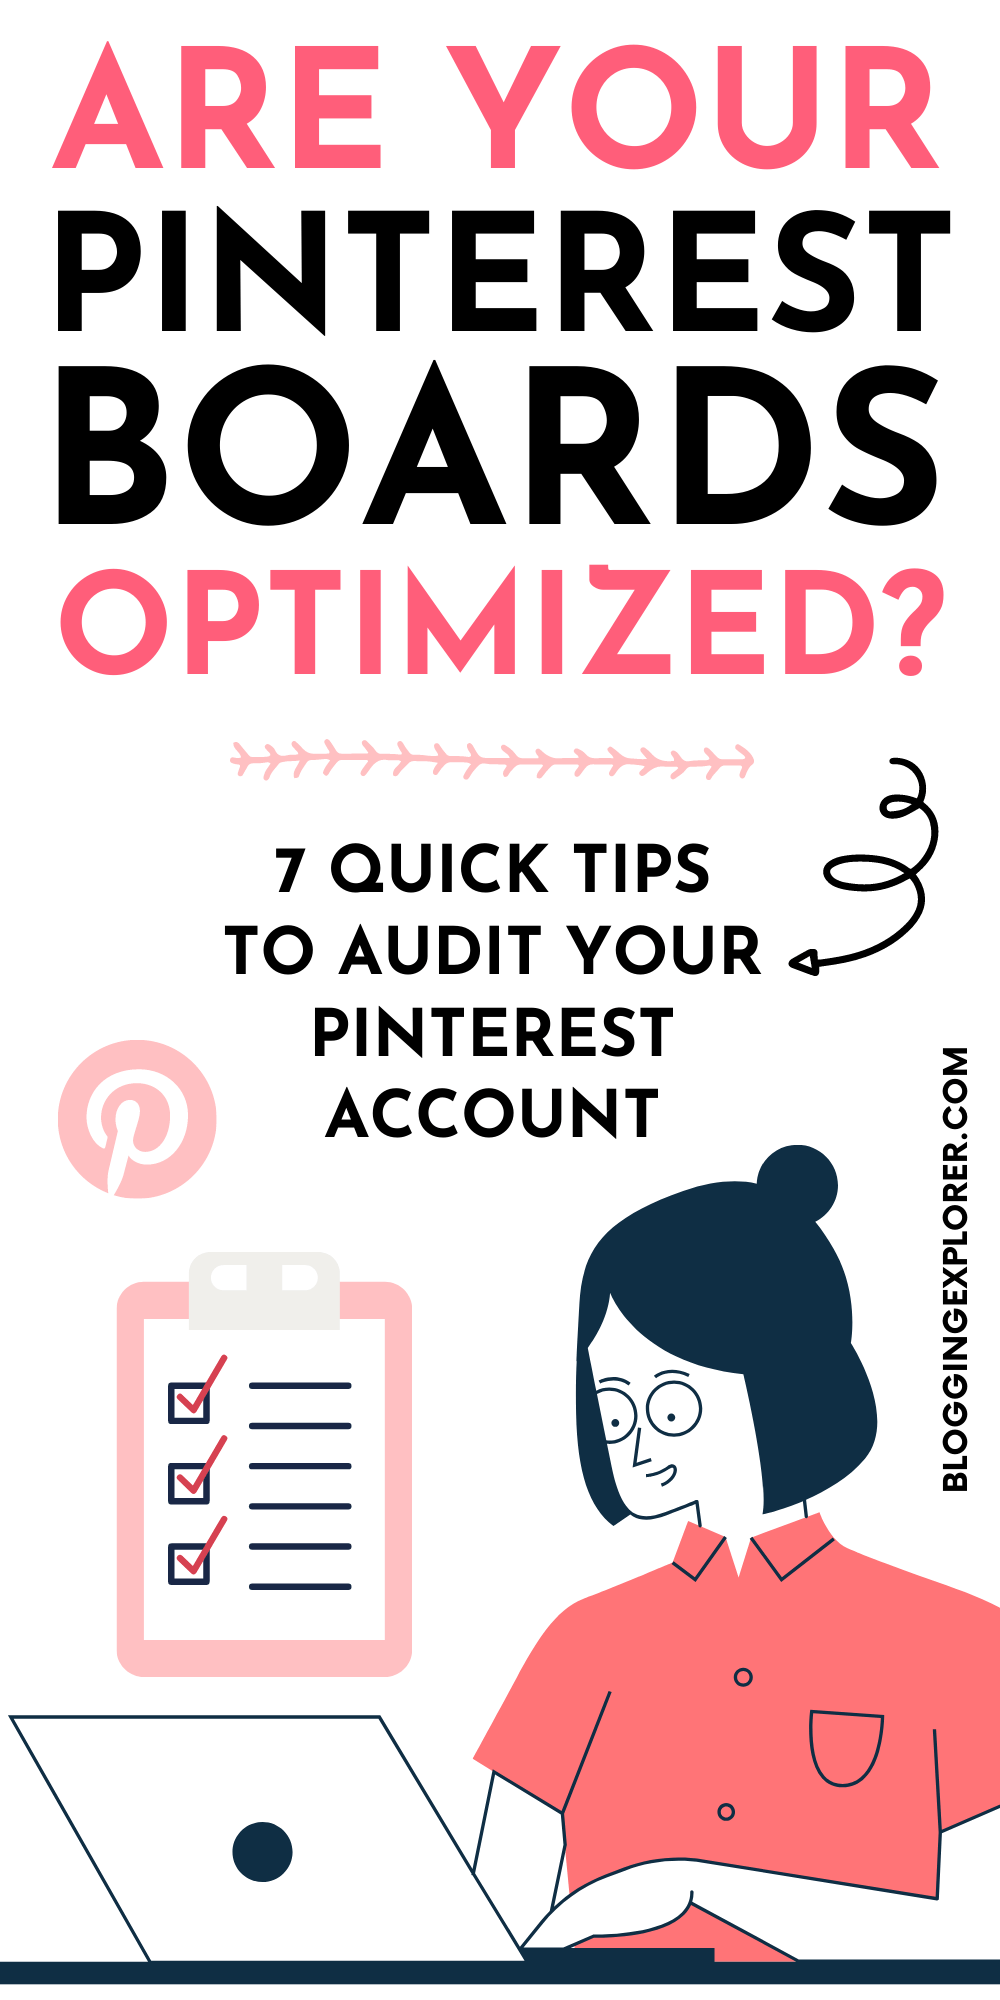 Are your Pinterest boards optimized? Quick tips to audit your Pinterest account